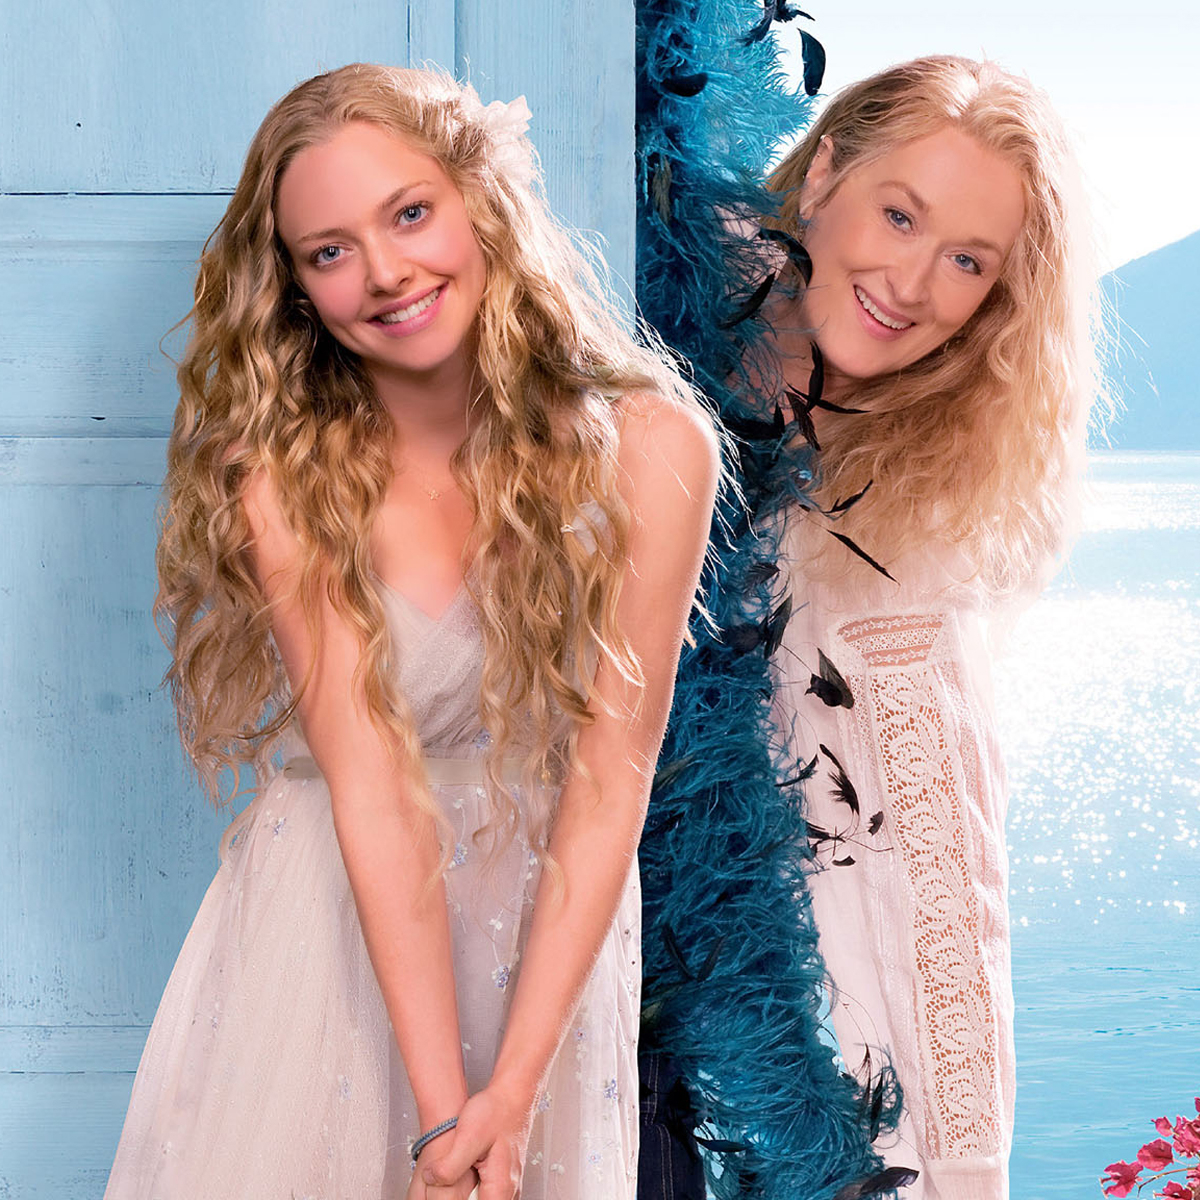 Is Mamma Mia 3 Really in the Works? Director Ol Parker Says… – E! Online